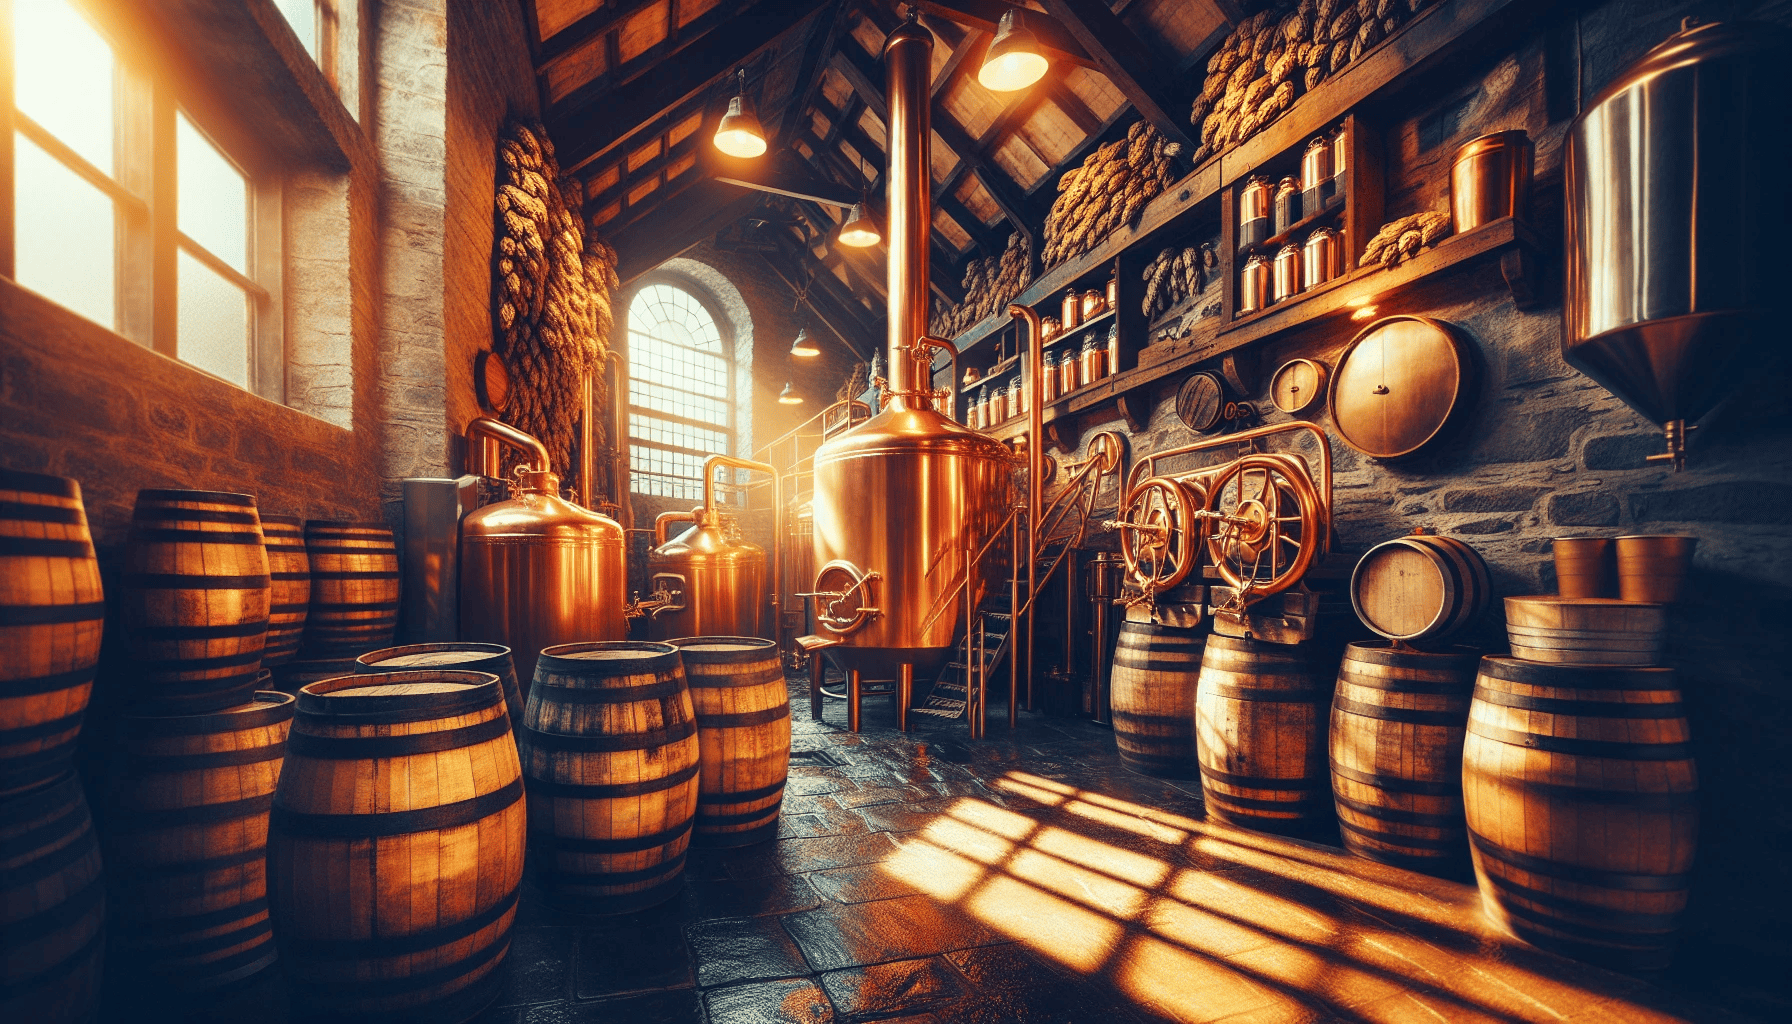 Artistic illustration of a craft brewery with brewing equipment and barrels